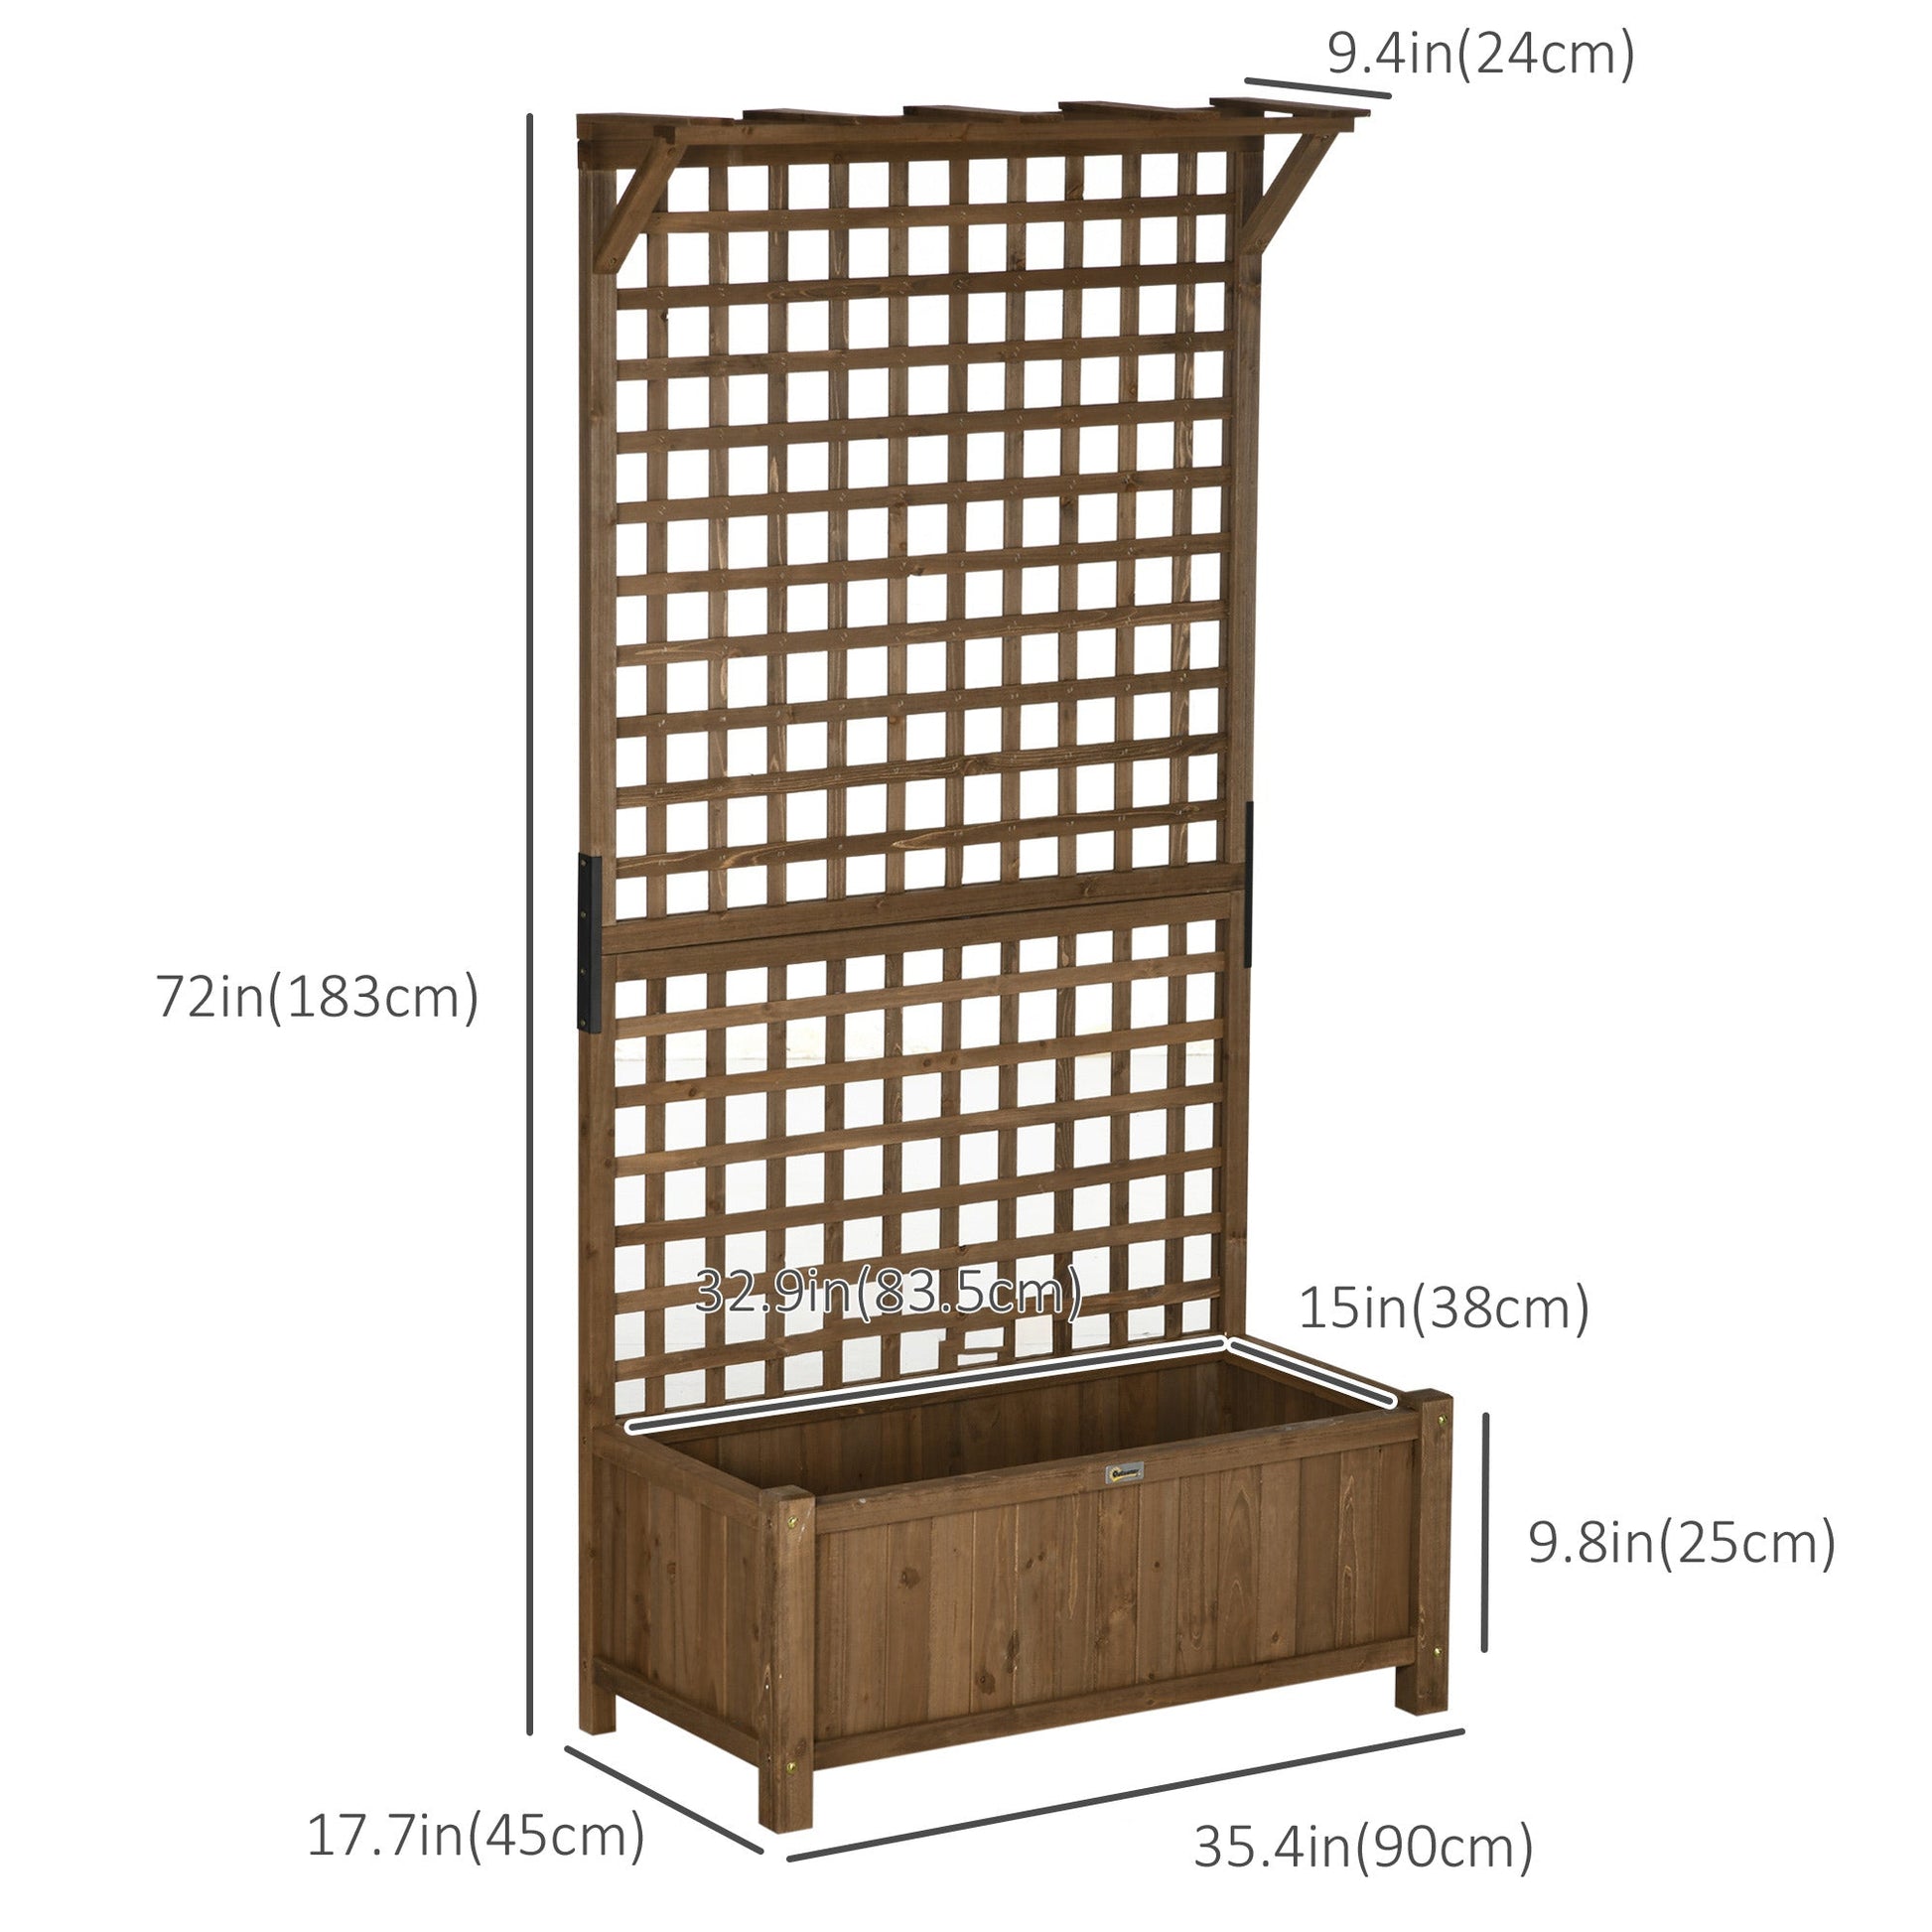 Wood Planter with Trellis for Vine Climbing, Raised Garden Bed, Privacy Screen for Backyard, Patio, Deck, Coffee at Gallery Canada